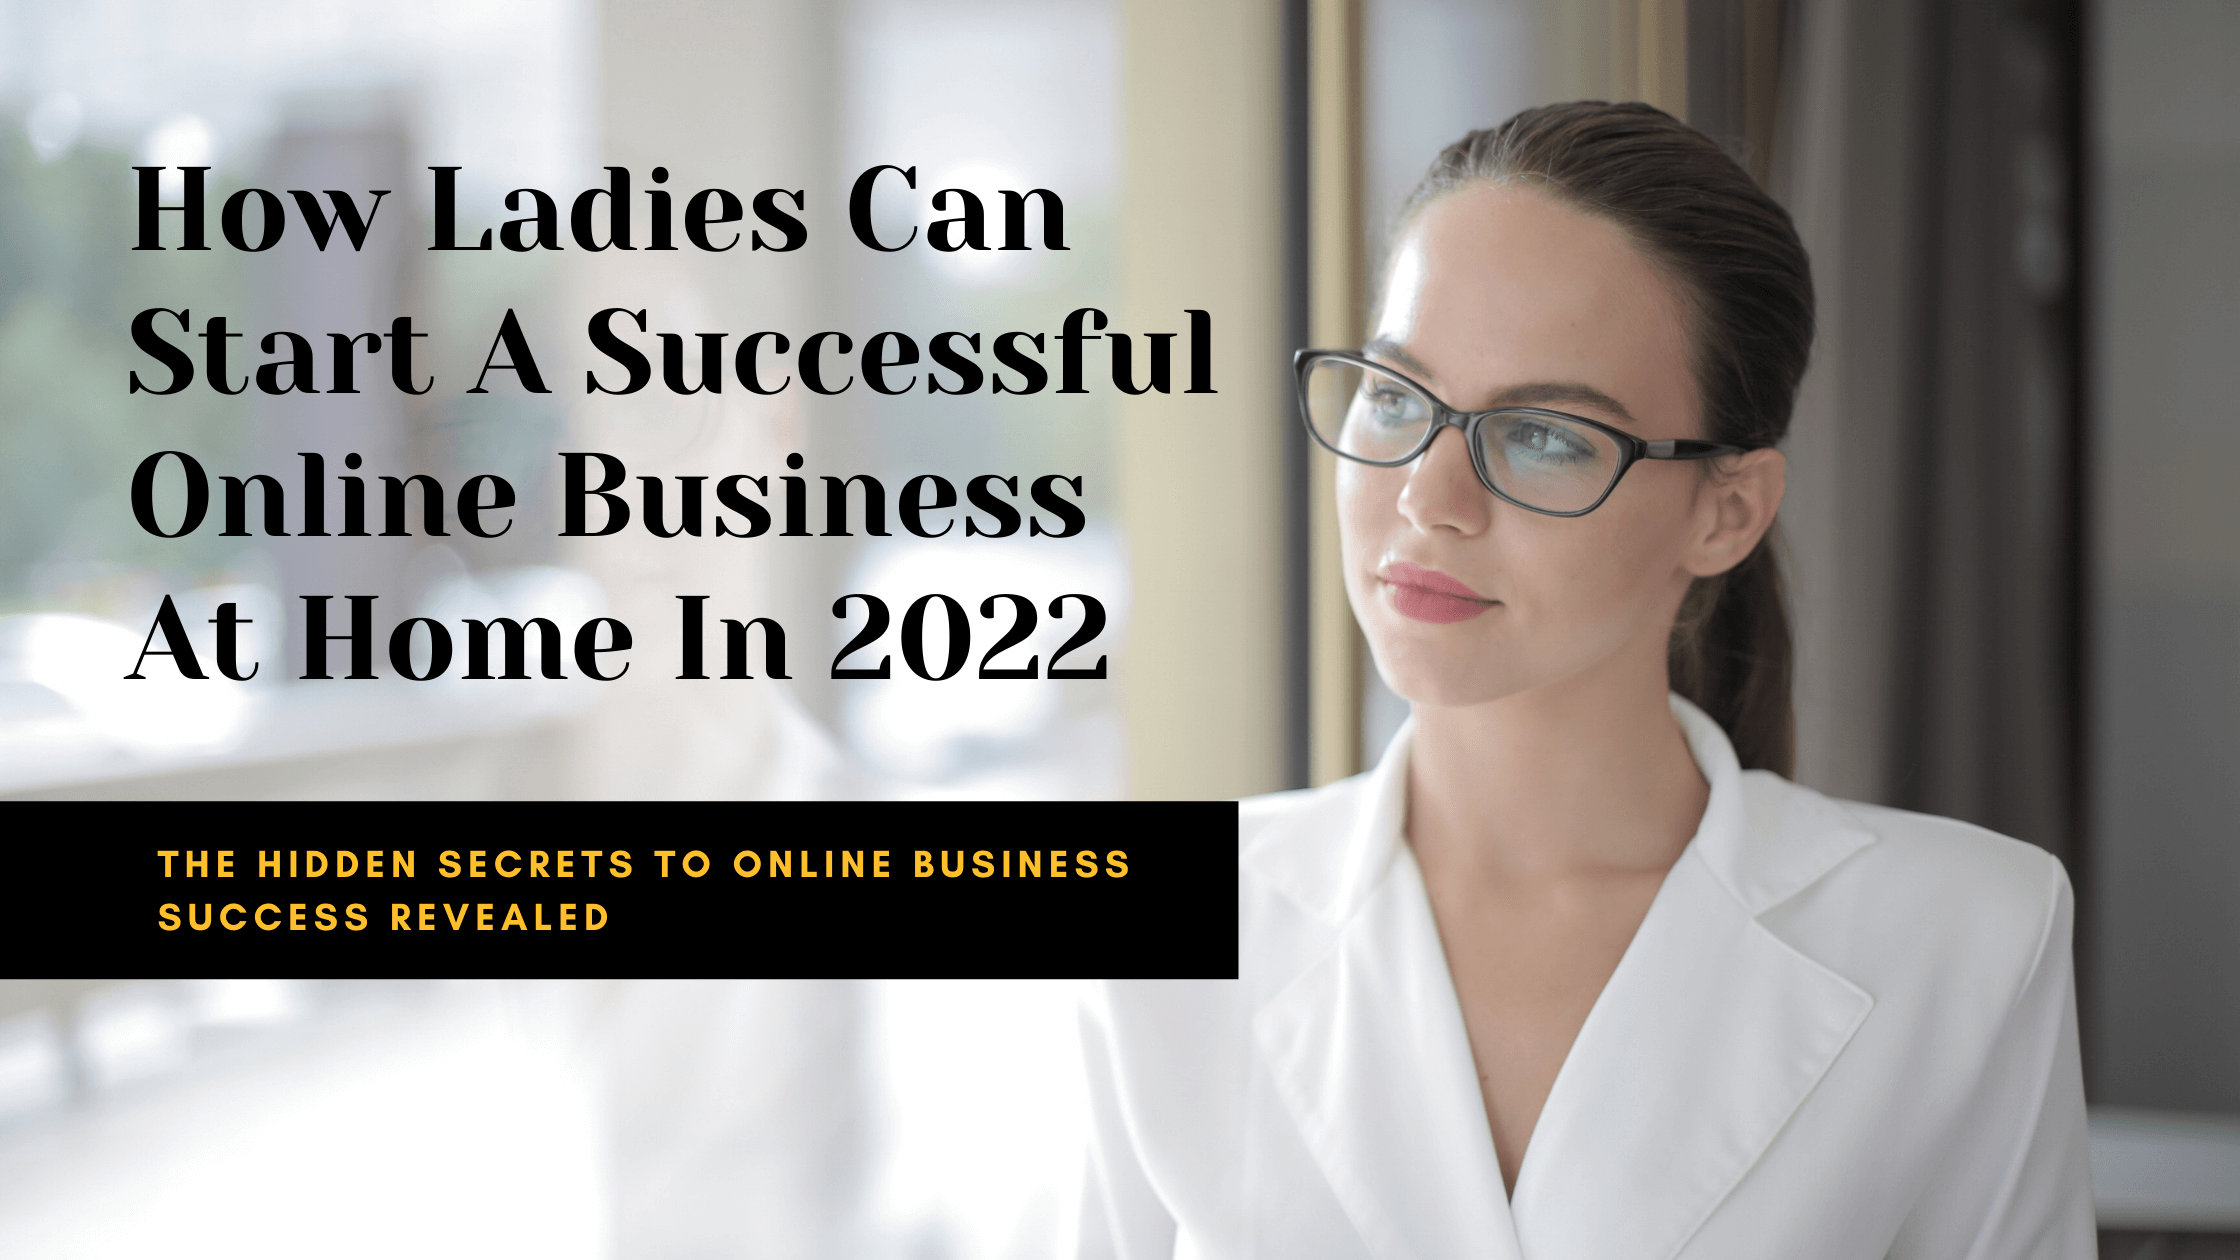 How Ladies Can Start A Successful Online Business At Home In 2022